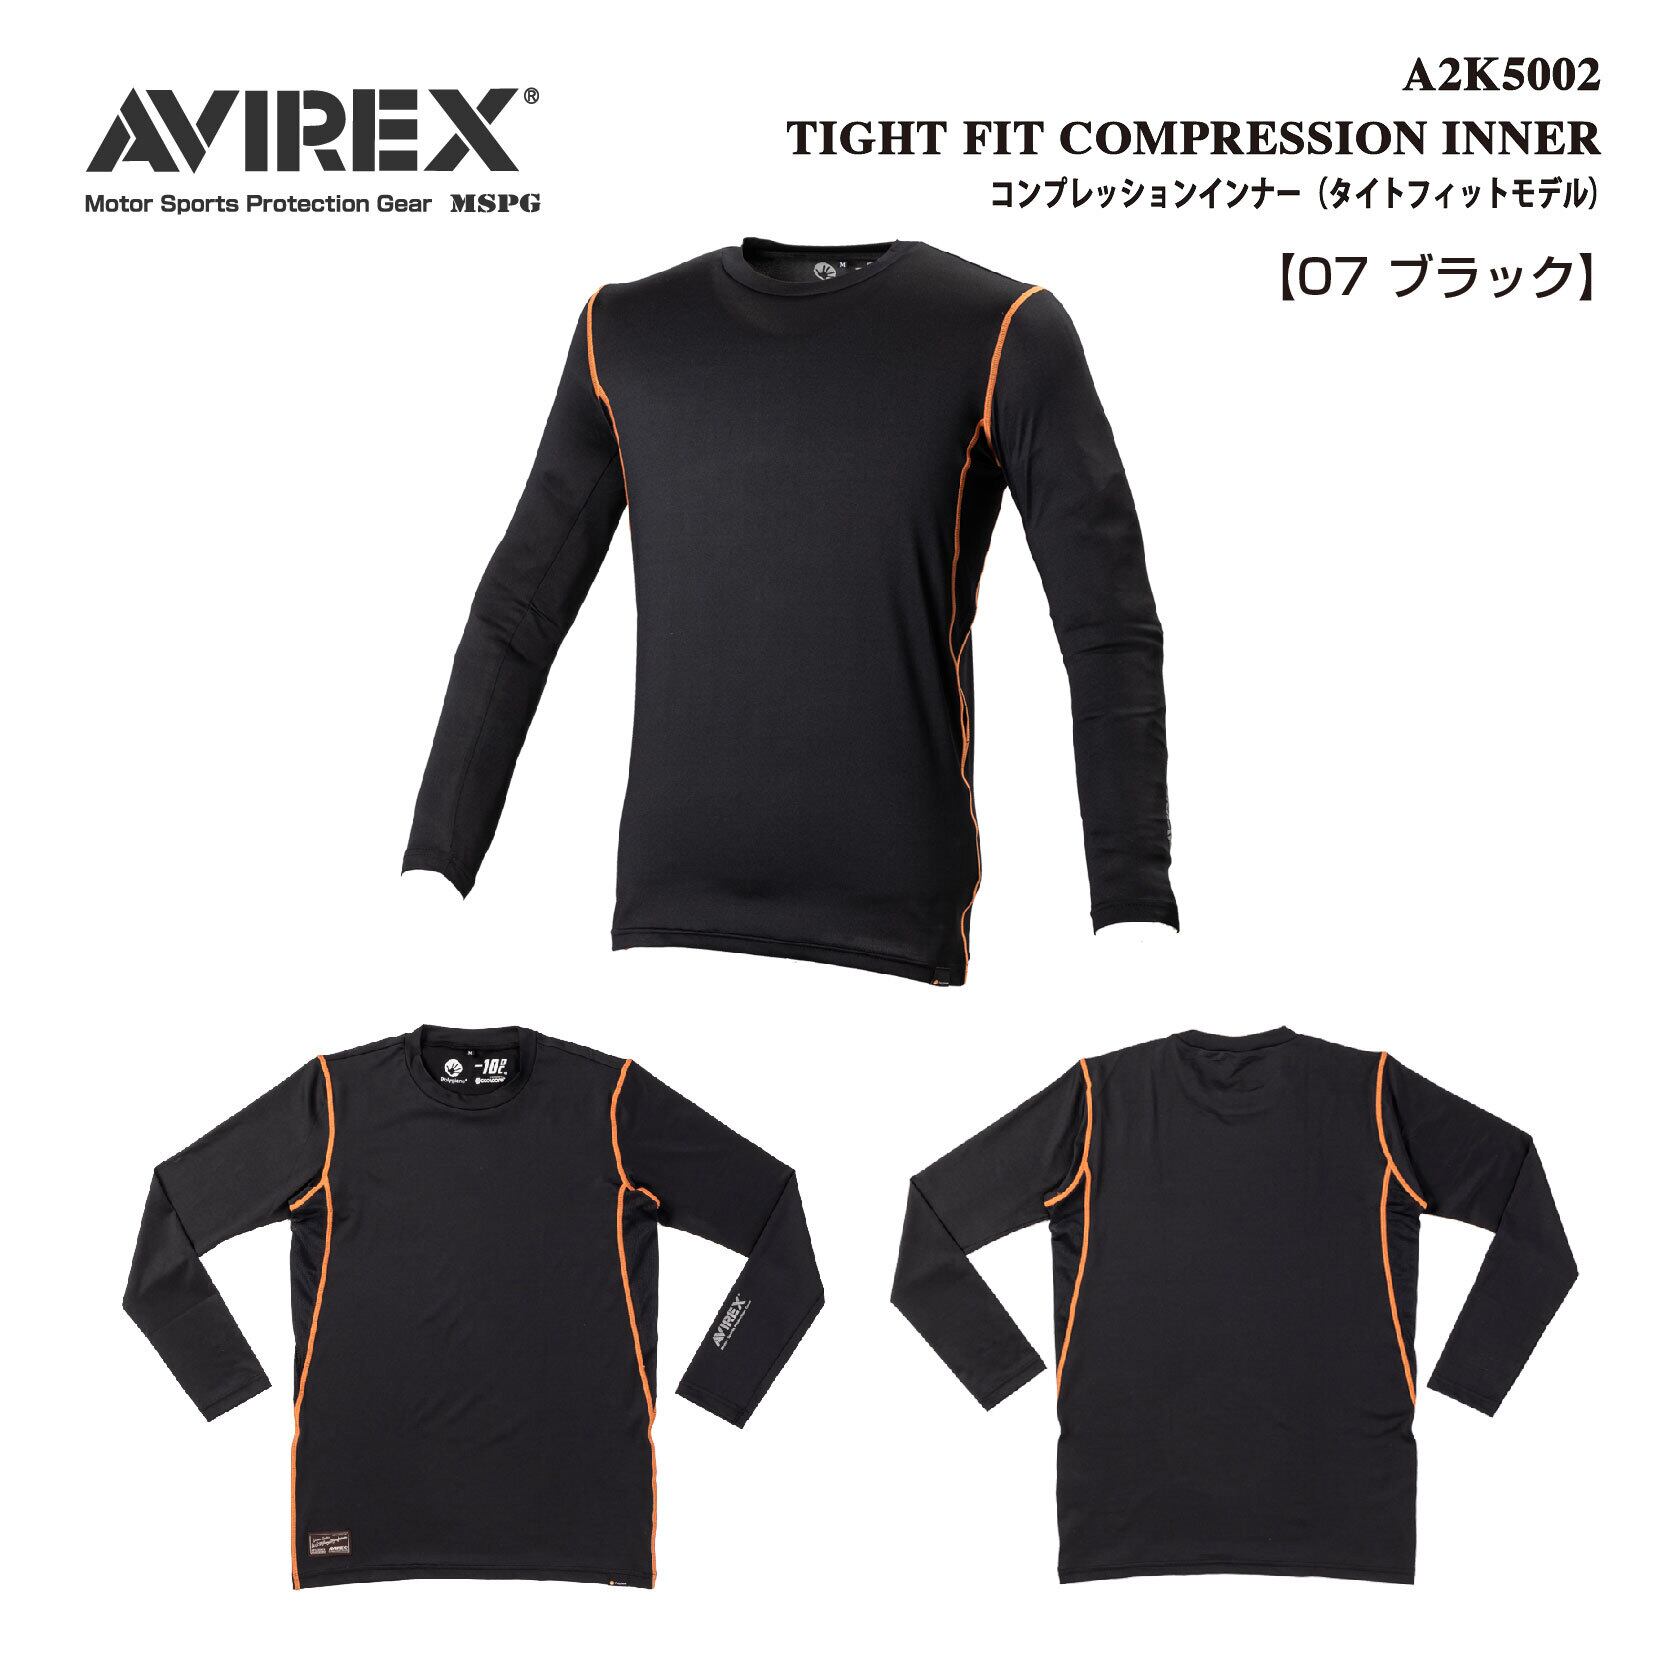 A2K5002 AVIREX TIGHT FIT COMPRESSION INNER アビレックス タイト